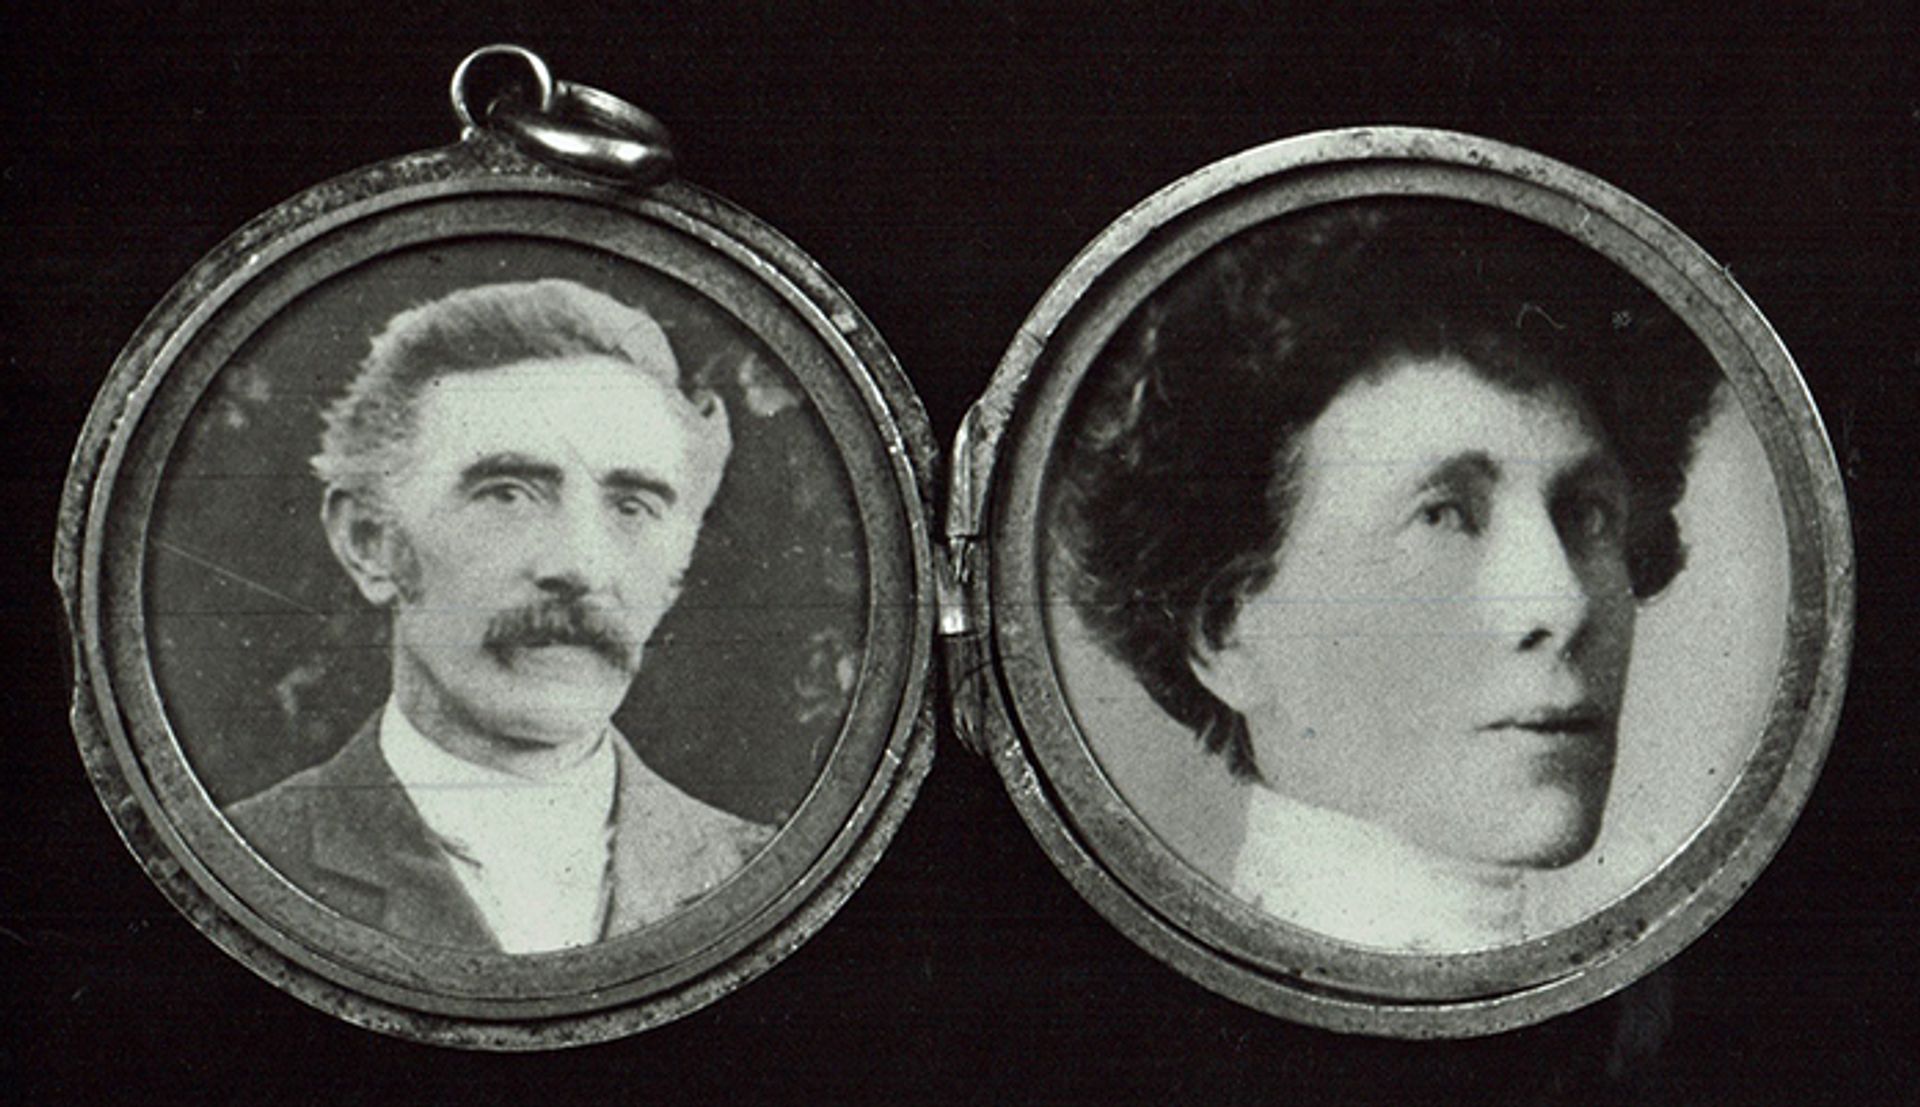 Gold locket with photographs of Samuel Plowman and the likely subject of Van Gogh's unrequited love, Eugenie Loyer (late 19th century). Now owned by their descendants © Yoke Matze MA